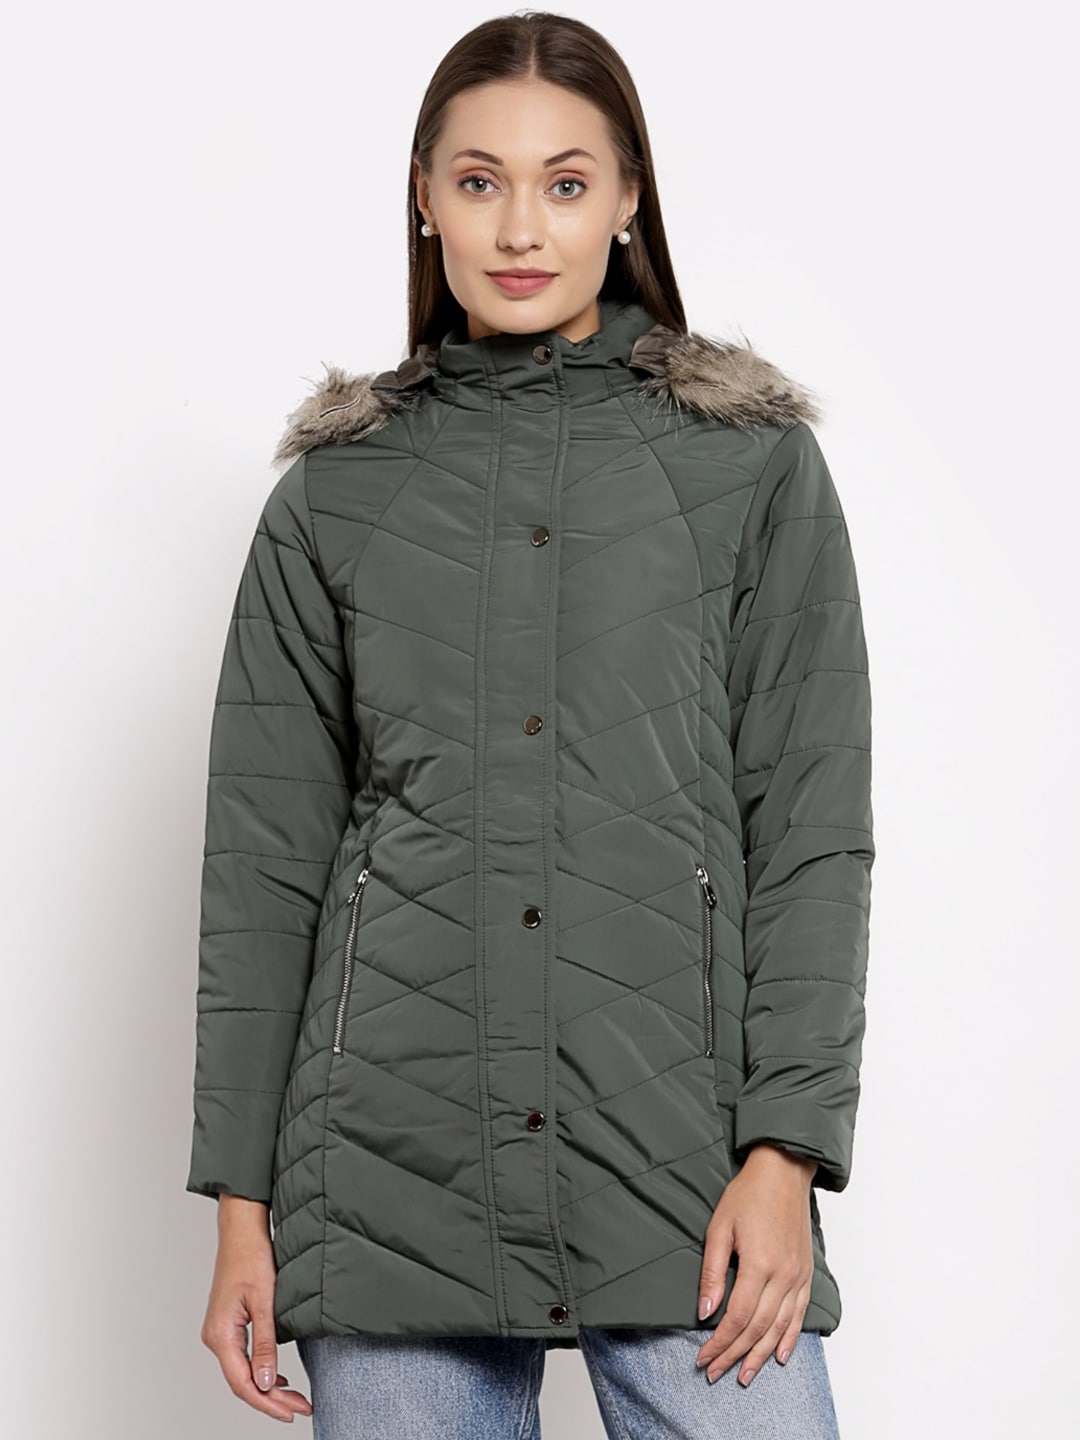 Juelle Women Green Camouflage Longline Parka Jacket Price in India